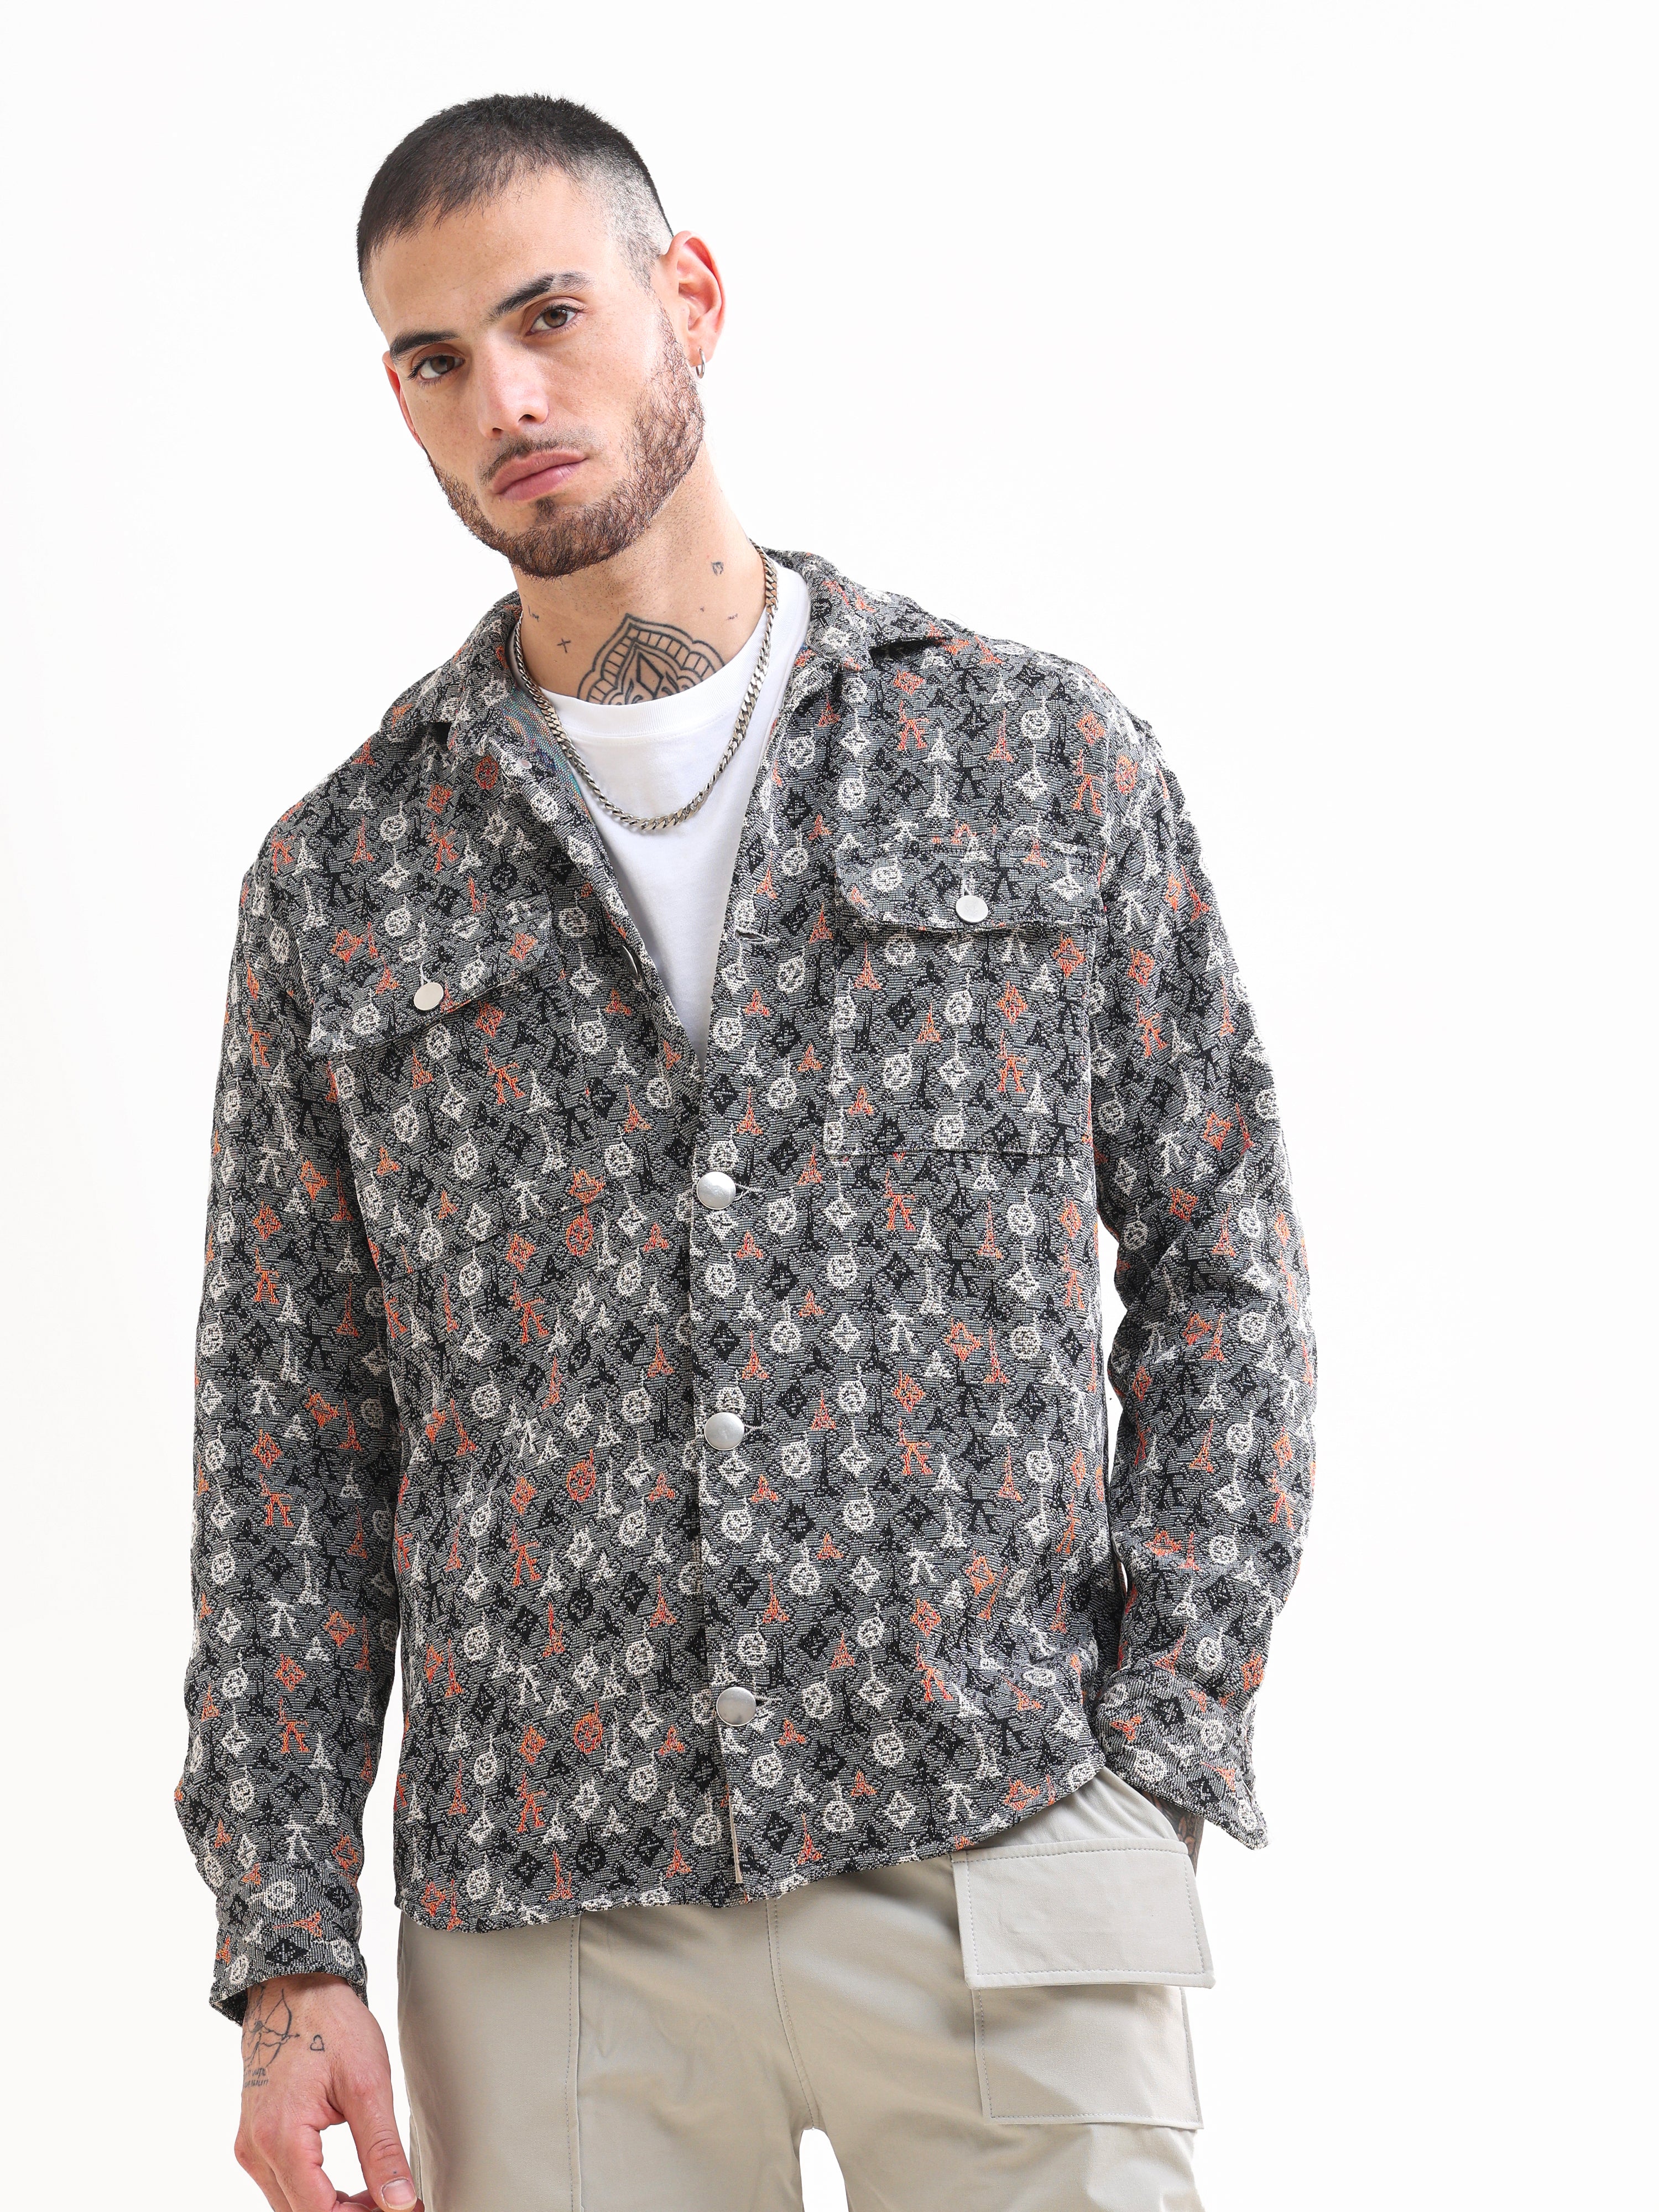 Heavy Jute Couture Canvas Grey OvershirtRs. 1599.00